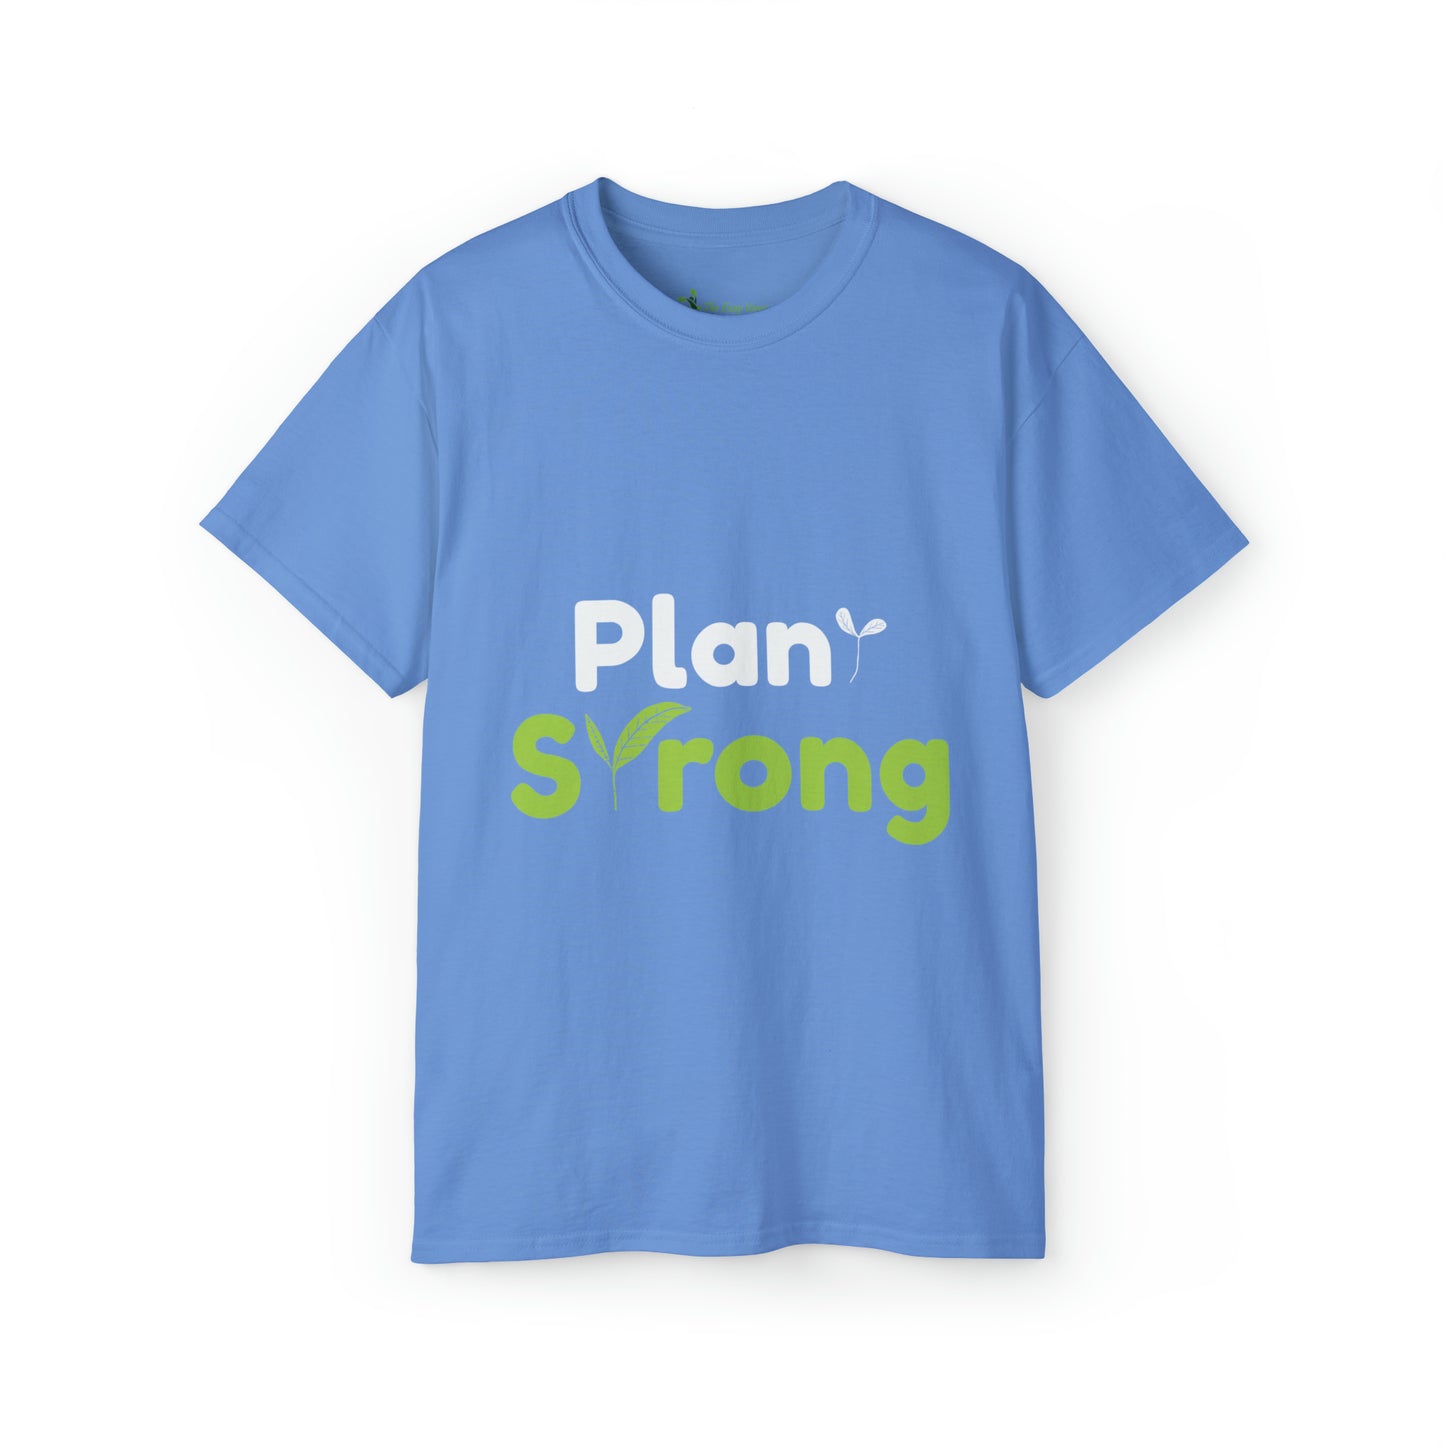 Plant Strong - Tee